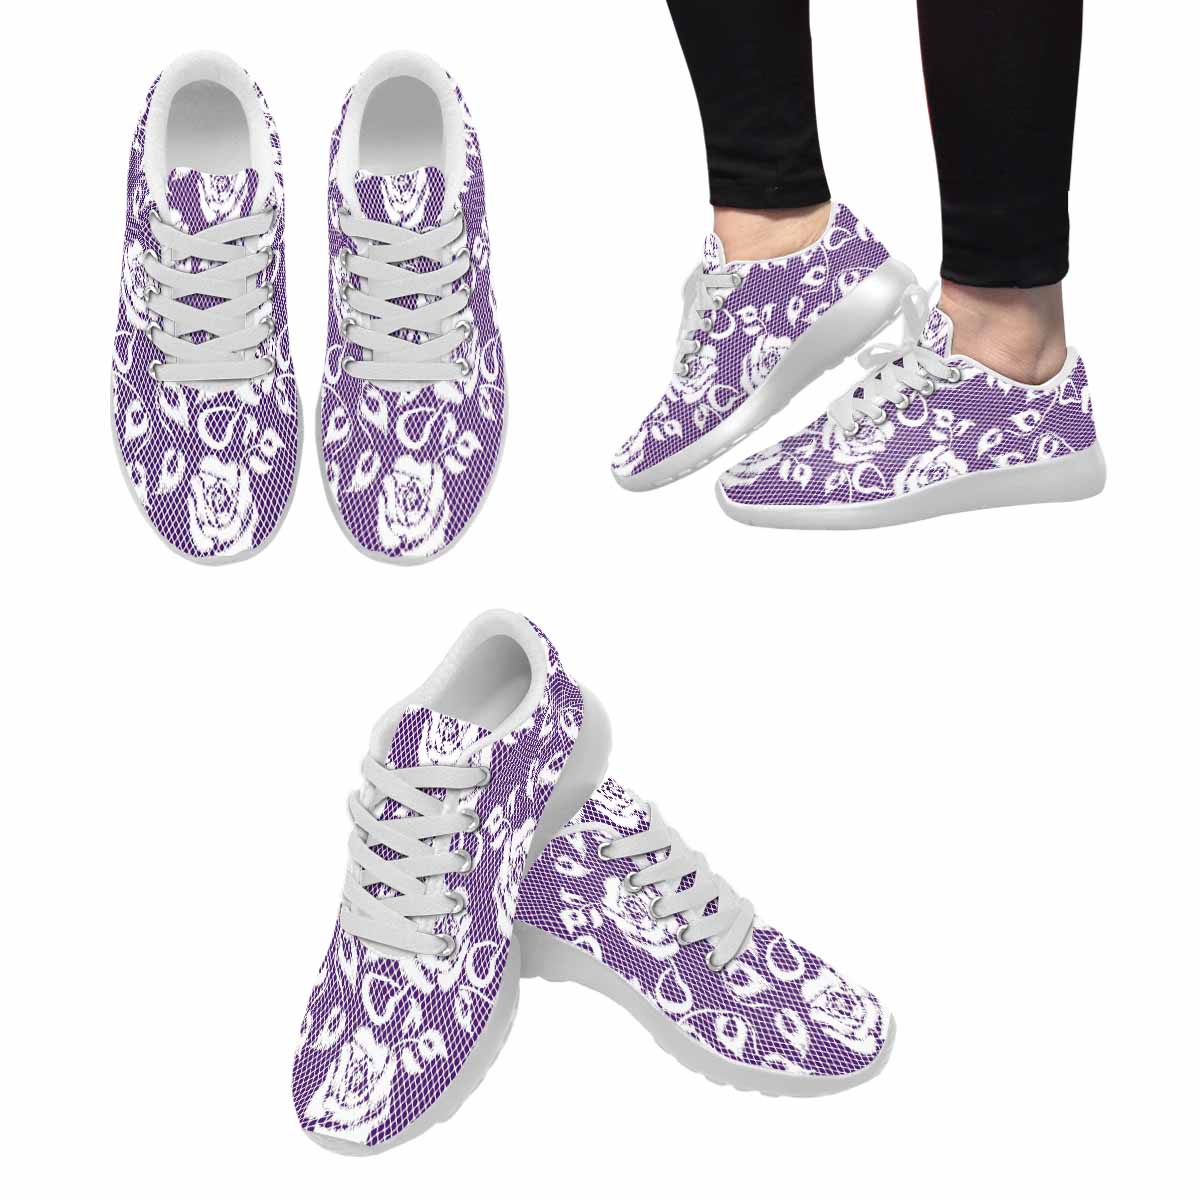 Victorian lace print, womens cute casual or running sneakers, design 18